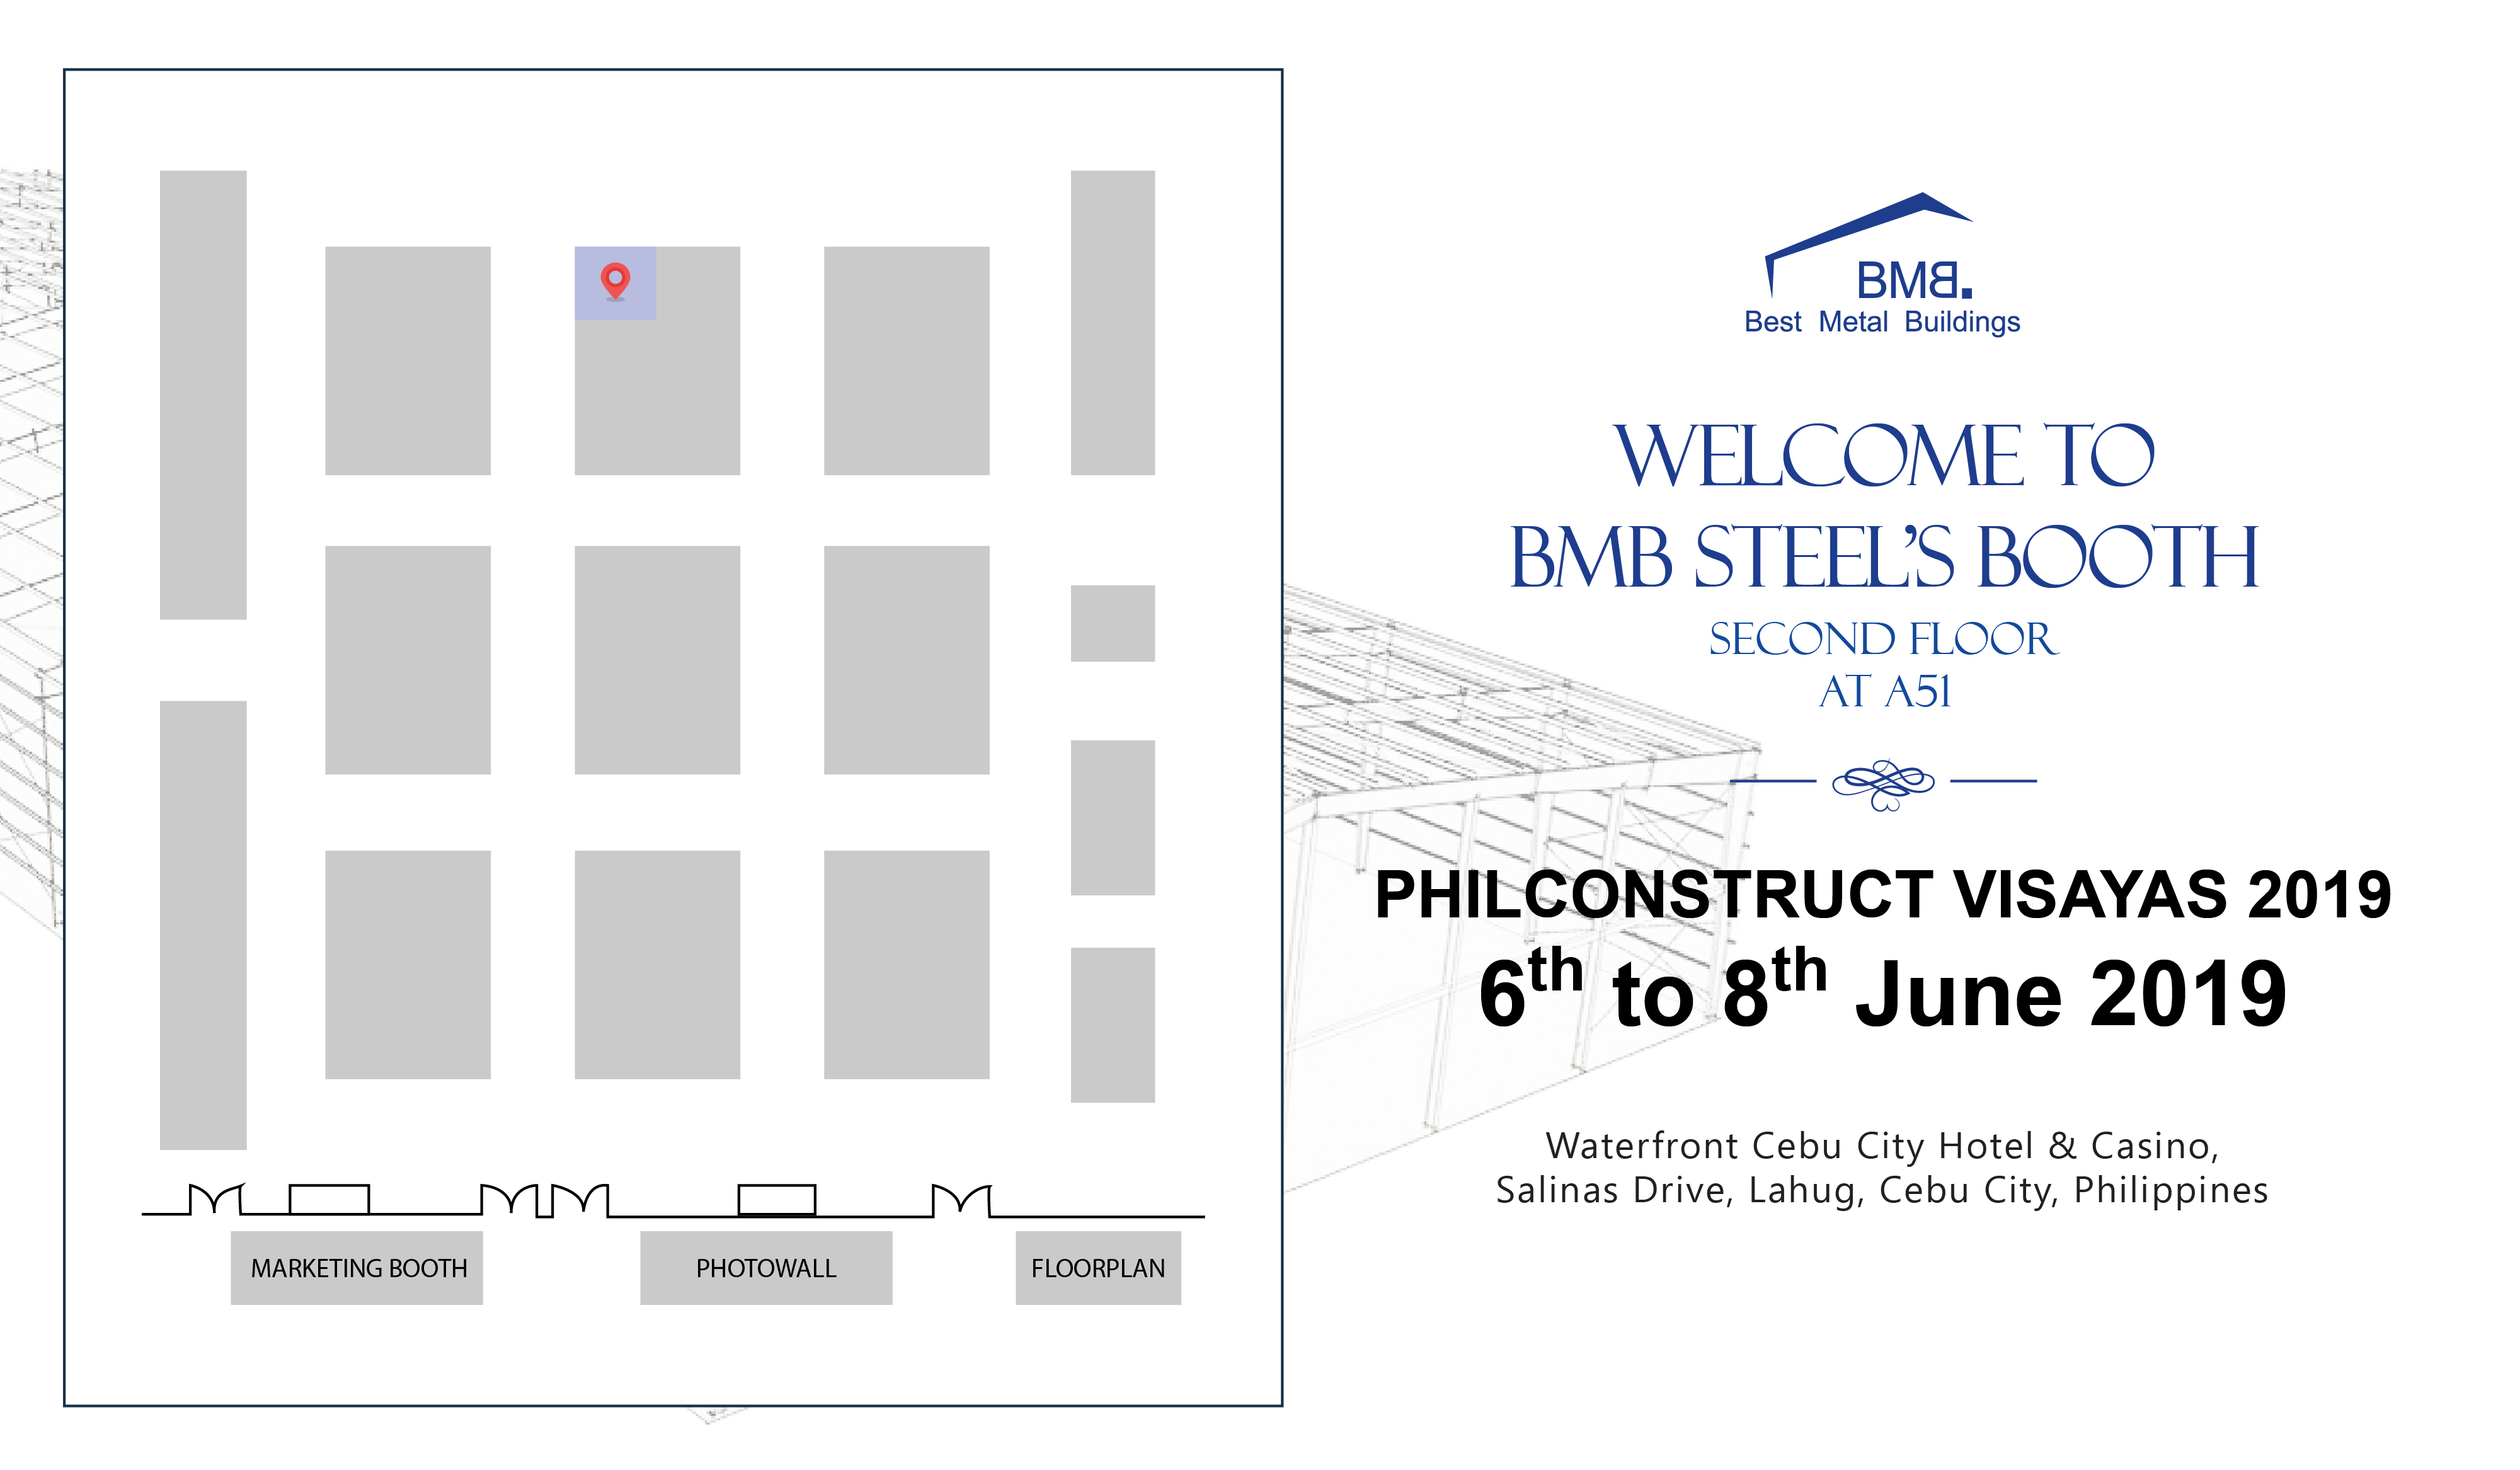 BMB Steel delightedly invites you to visit our booth at Philconstruct.